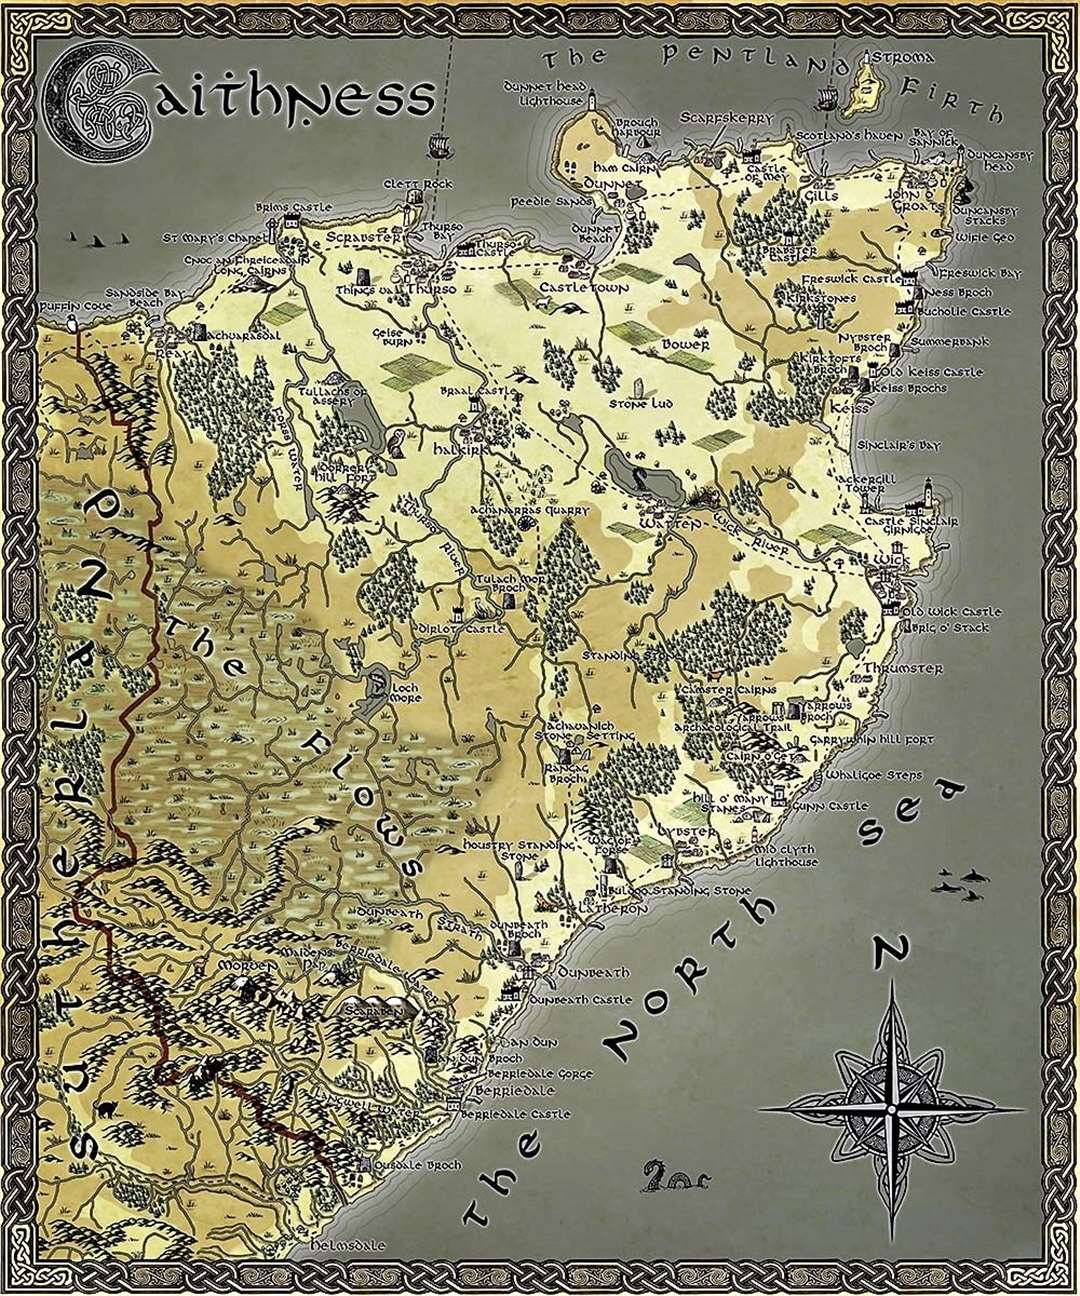 Caithness fantasy map to be used in the broch project leaflet.